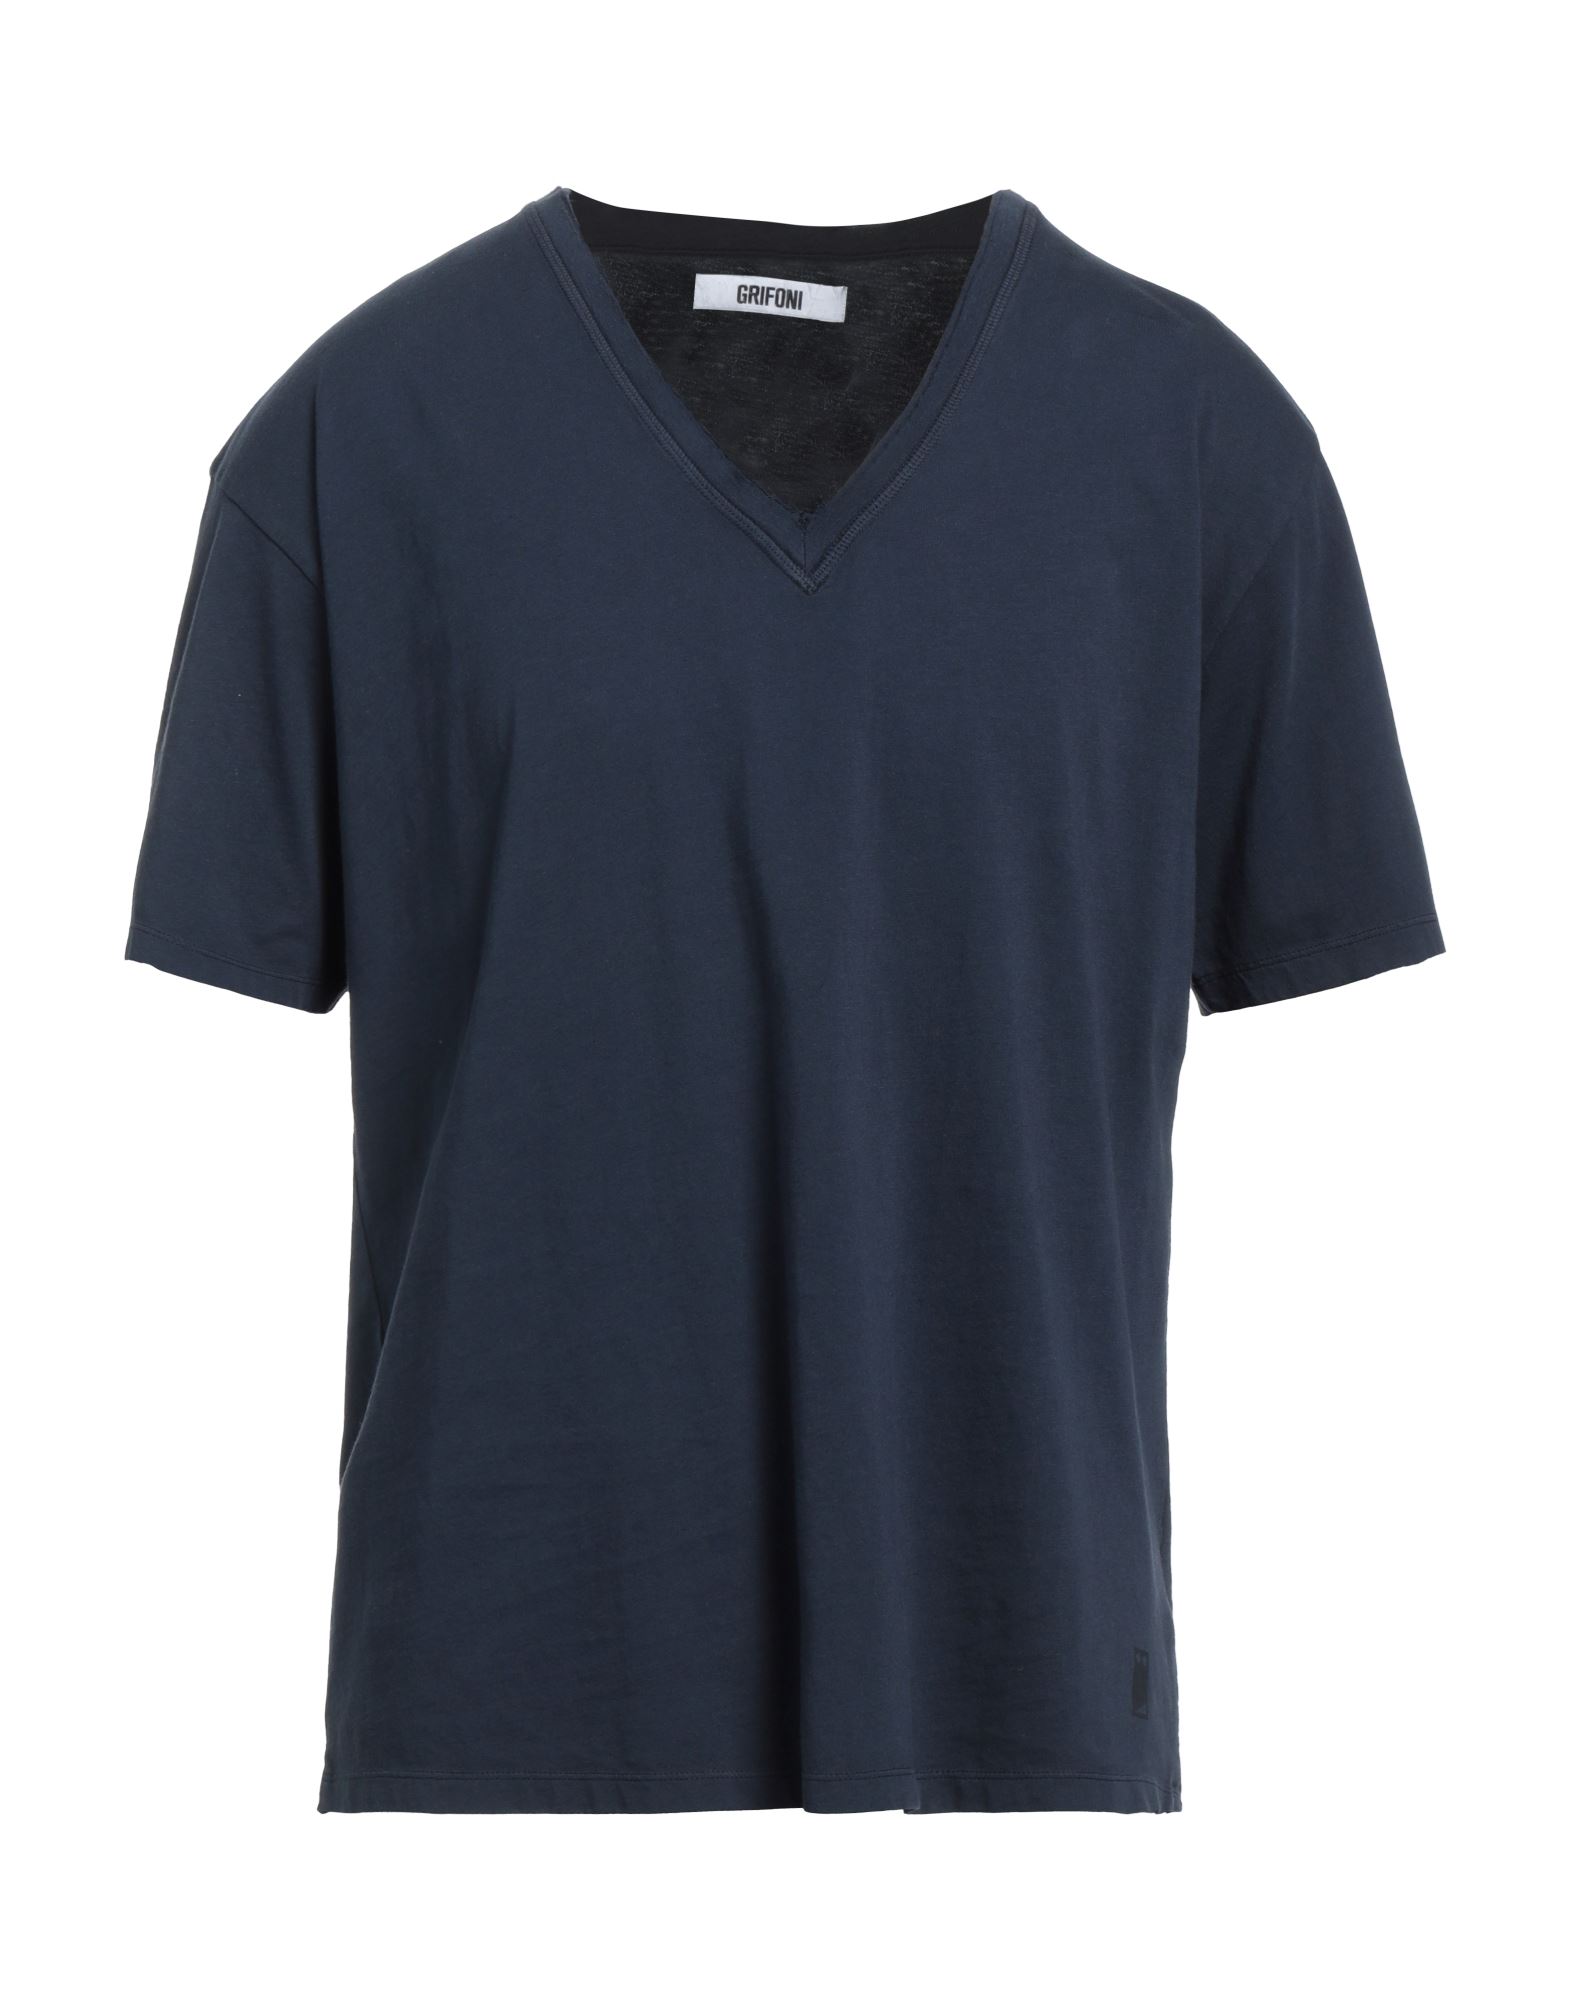 Mauro Grifoni T-shirts In Navy Blue